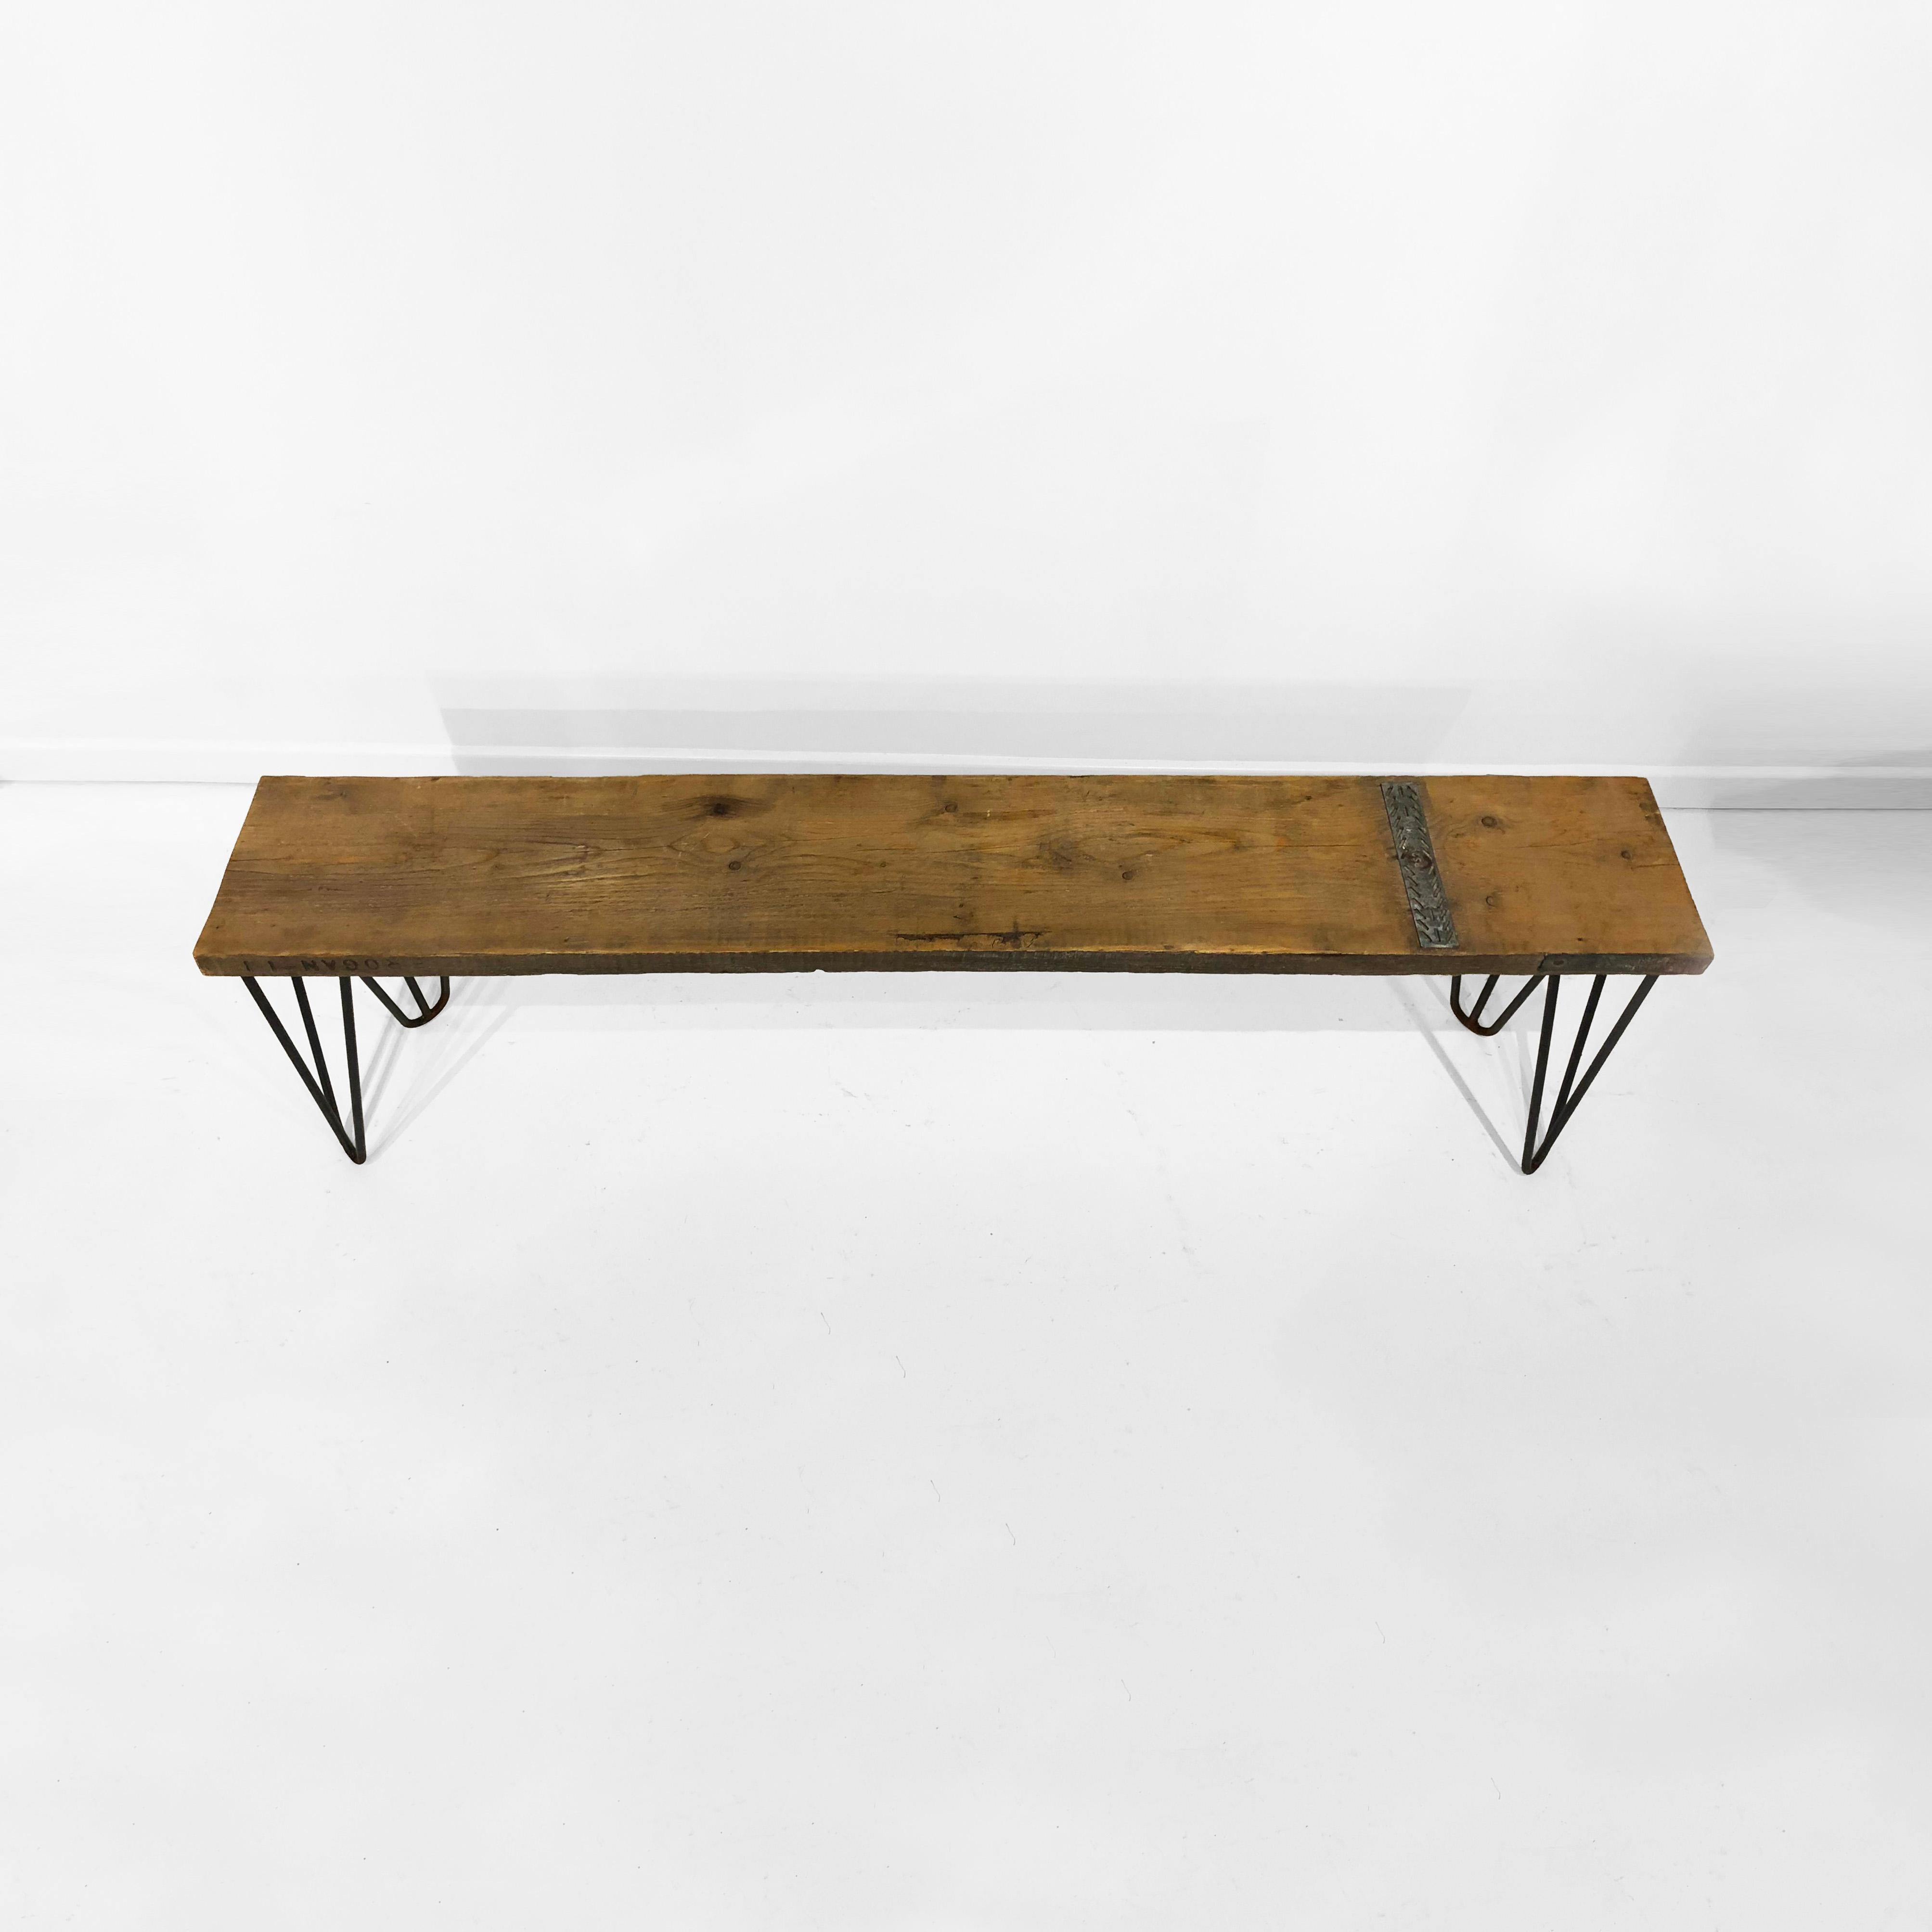 British Industrial Bench with Hairpin Legs and Scaffolding Wood Mid-Century Modern Seat For Sale